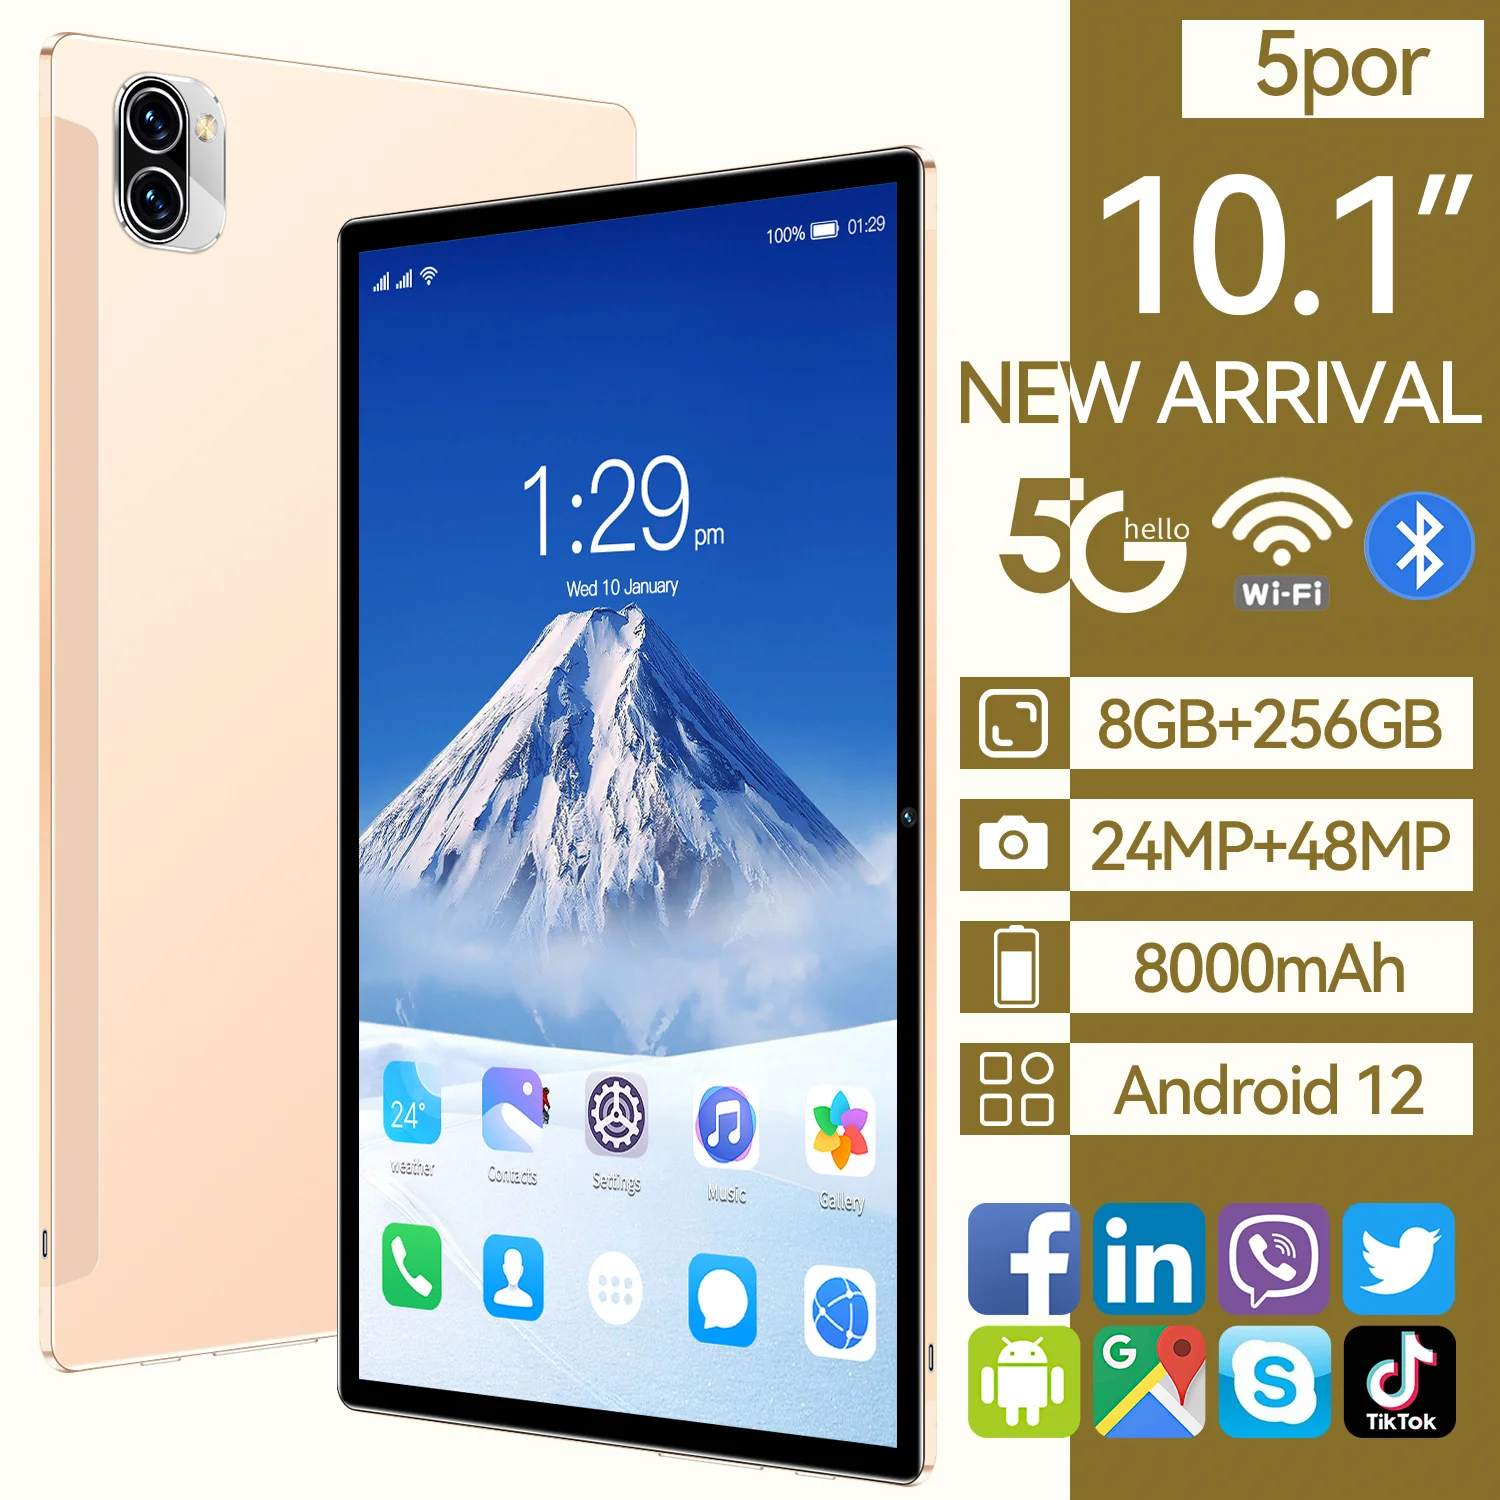 

NEW Tablet Global Version Android 12 Call Phone 8000mAh 8G+256GB WiFi 10.1Inch PC Tablet 5GDual SIM SD Card